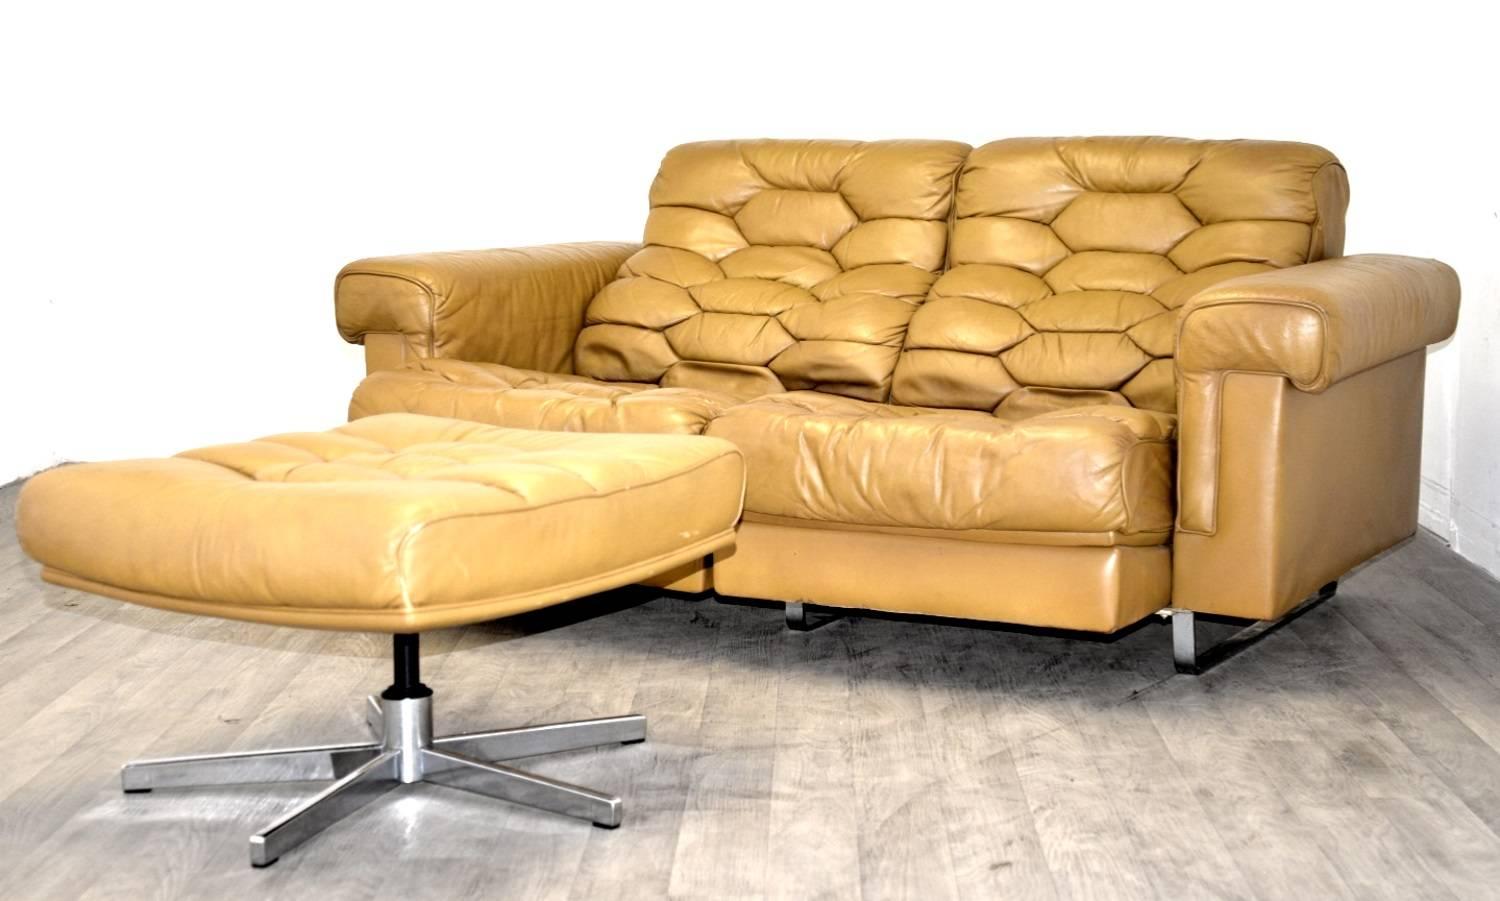 Discounted airfreight for our US and International customers ( from 2 weeks door to door ) 

The Cambridge Chair Company brings to you a beautiful two seater reclining sofa from De Sede of Switzerland. Designed by Robert Haussmann with a honeycomb